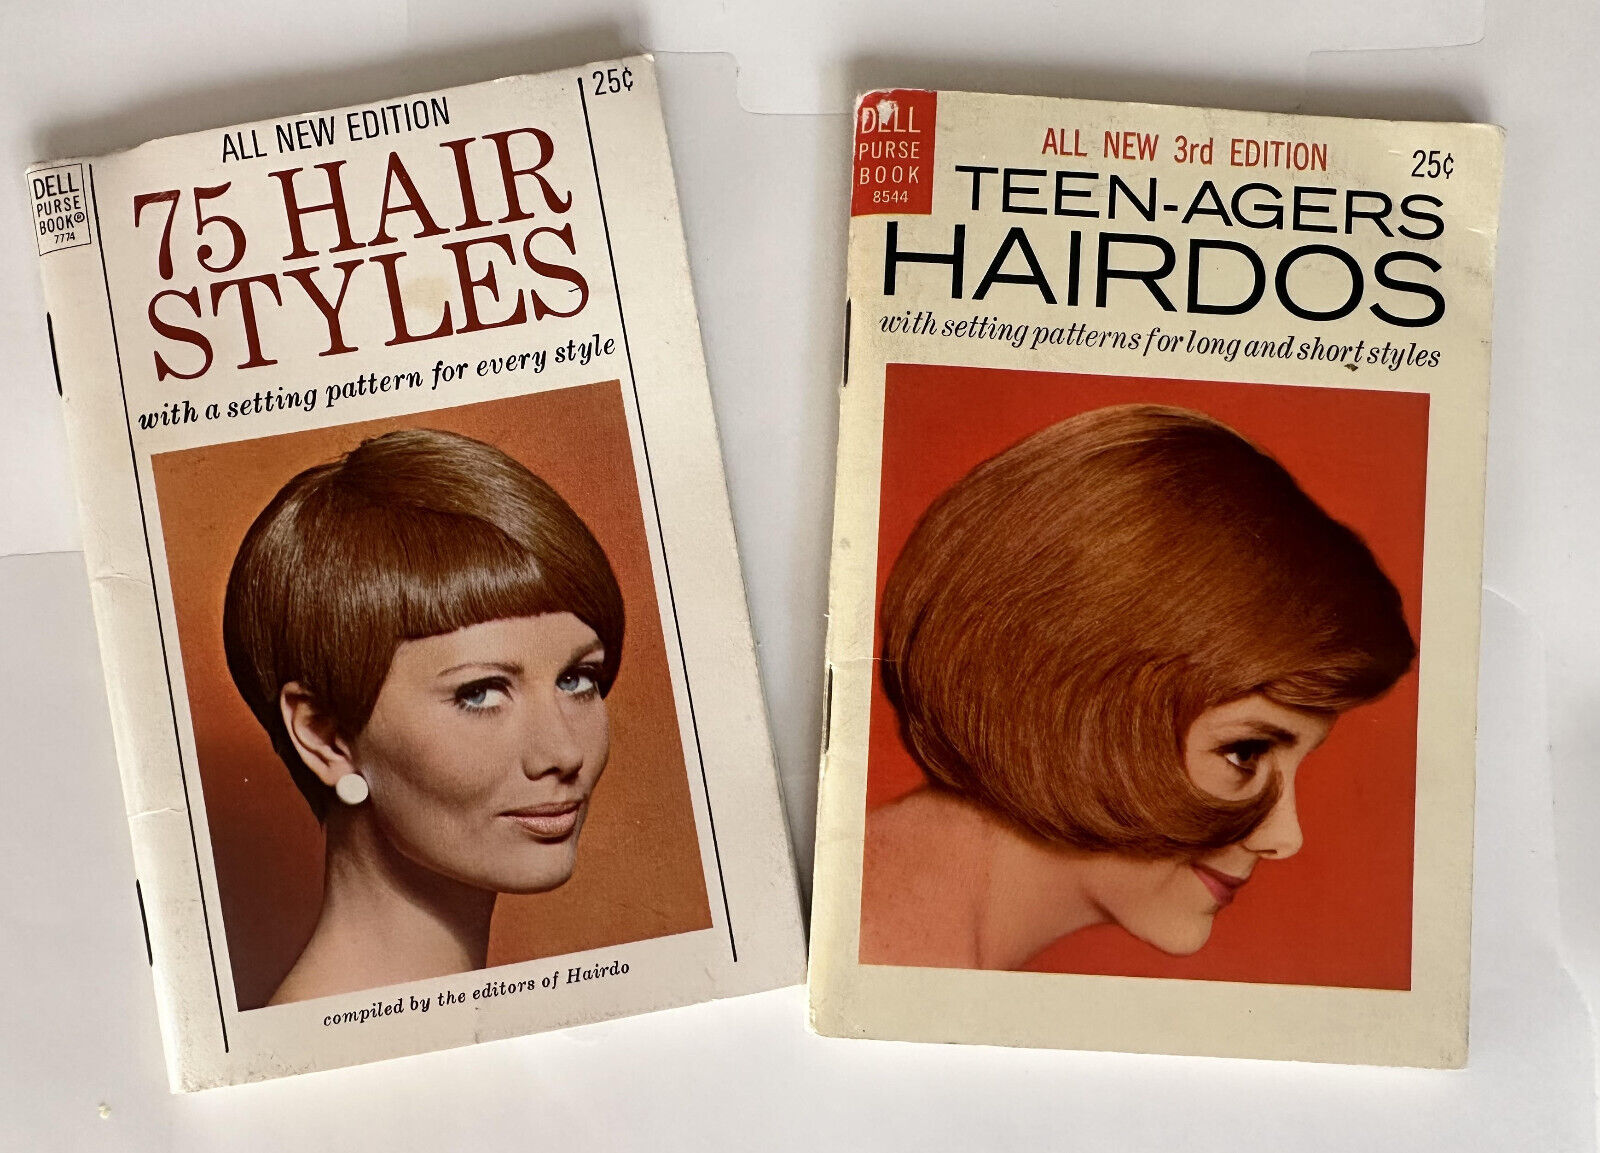 2 Dell purse books, 75 Hair Styles 1967, Teenagers Hairdos 1964 original owner